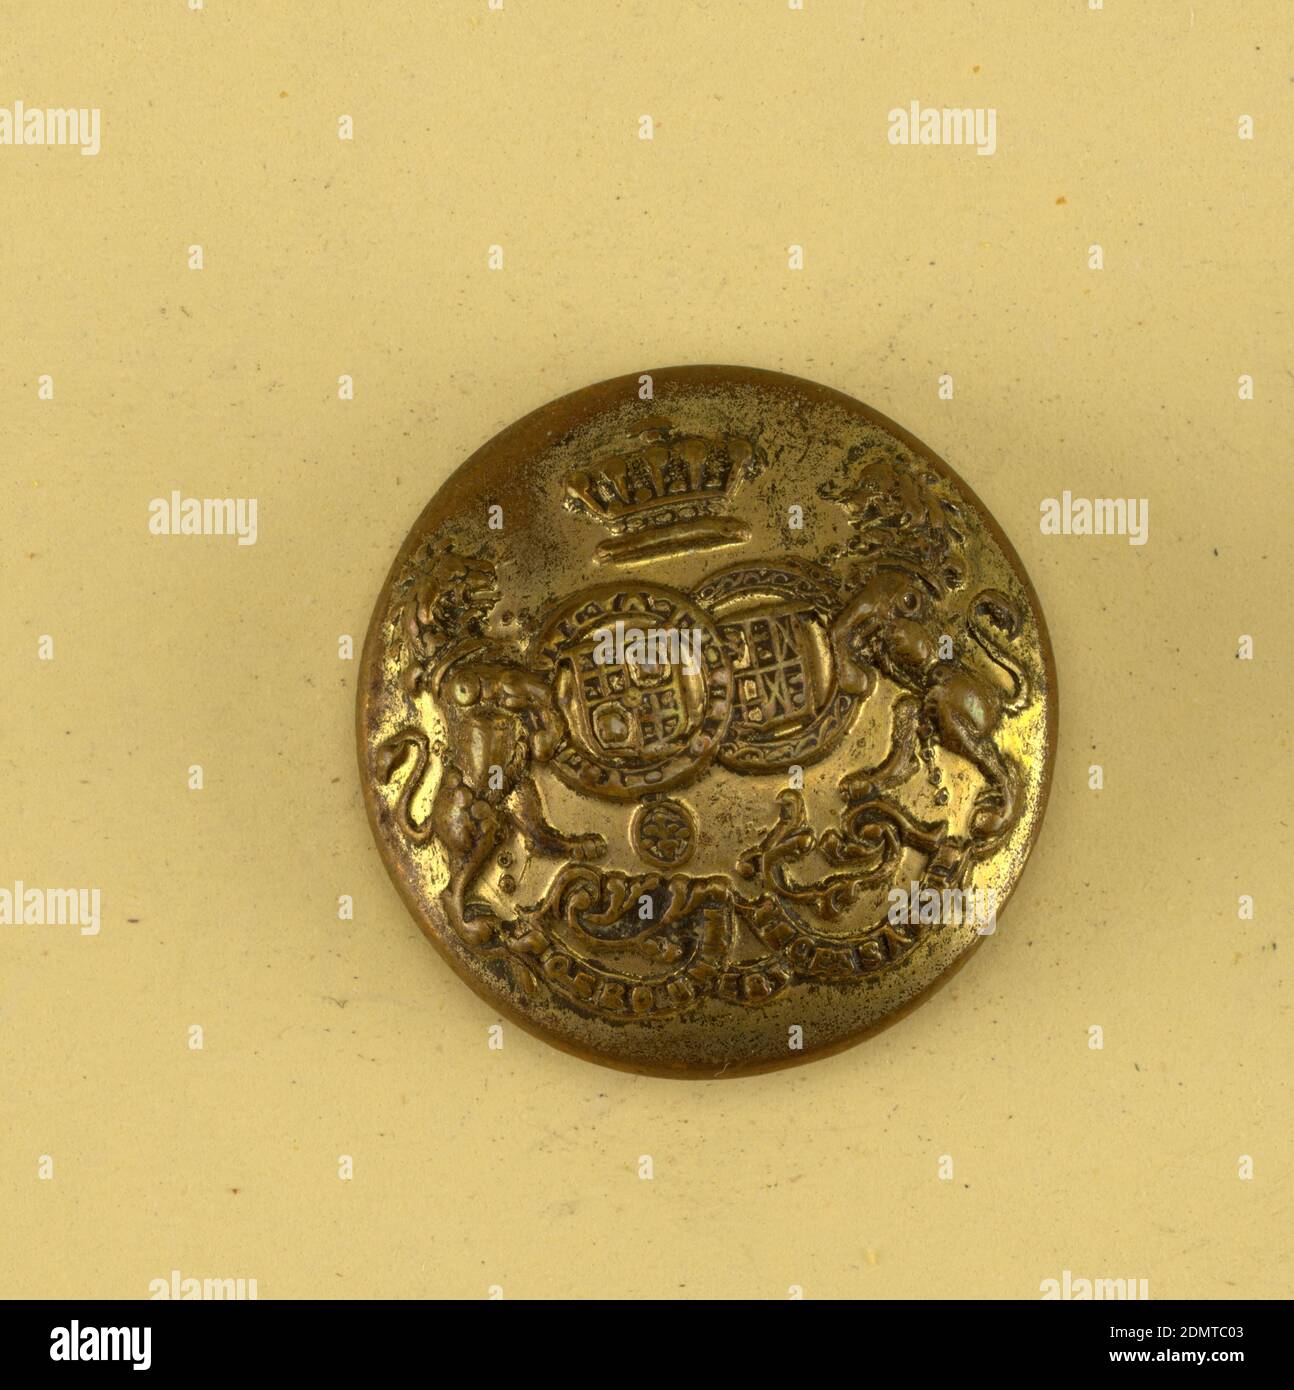 Button, Brass, Convex button showing coat of arms; two sheilds with heraldic  devices surrounded by chains, lions supporters crown above and below,  ribbon with 'Porro unum est necessitarium'. Brass back and shank.